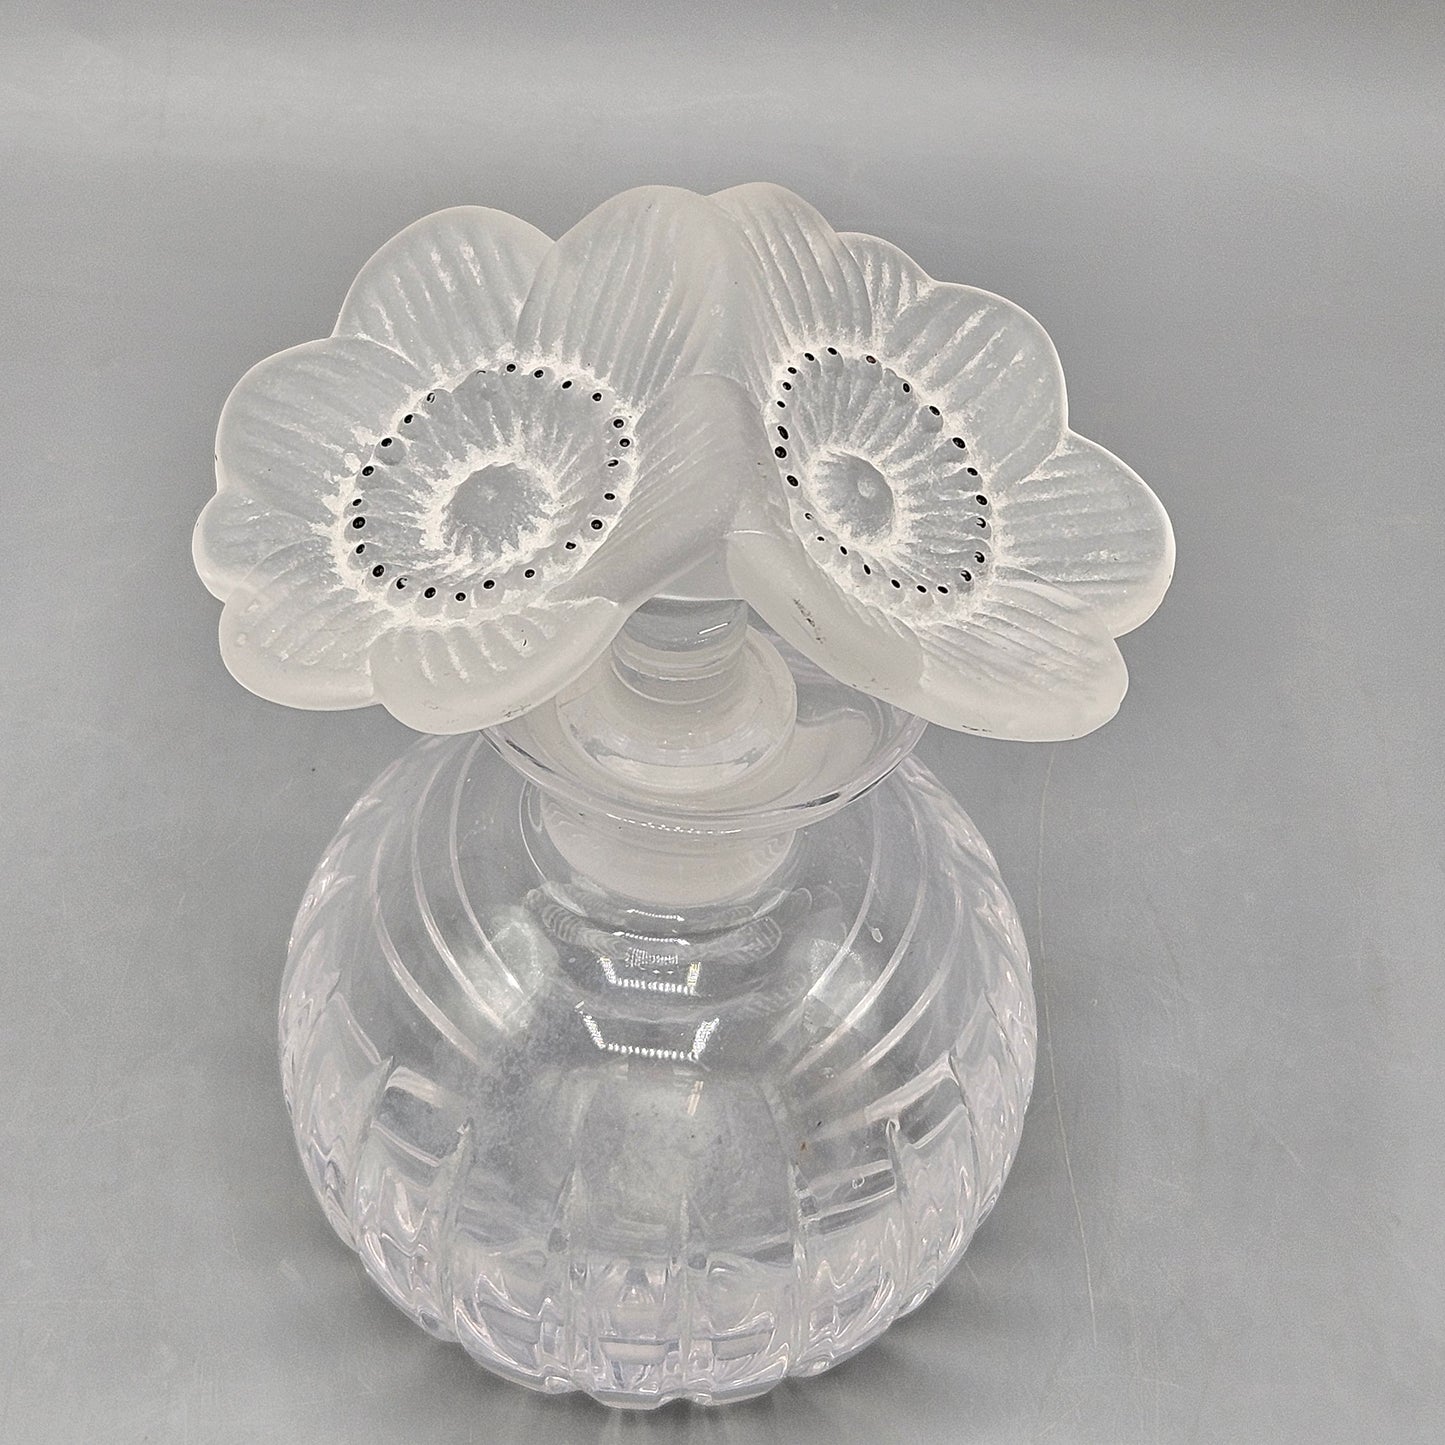 Beautiful Vintage Frosted Double Anemone Flower Crystal Perfume Bottle with Stopper